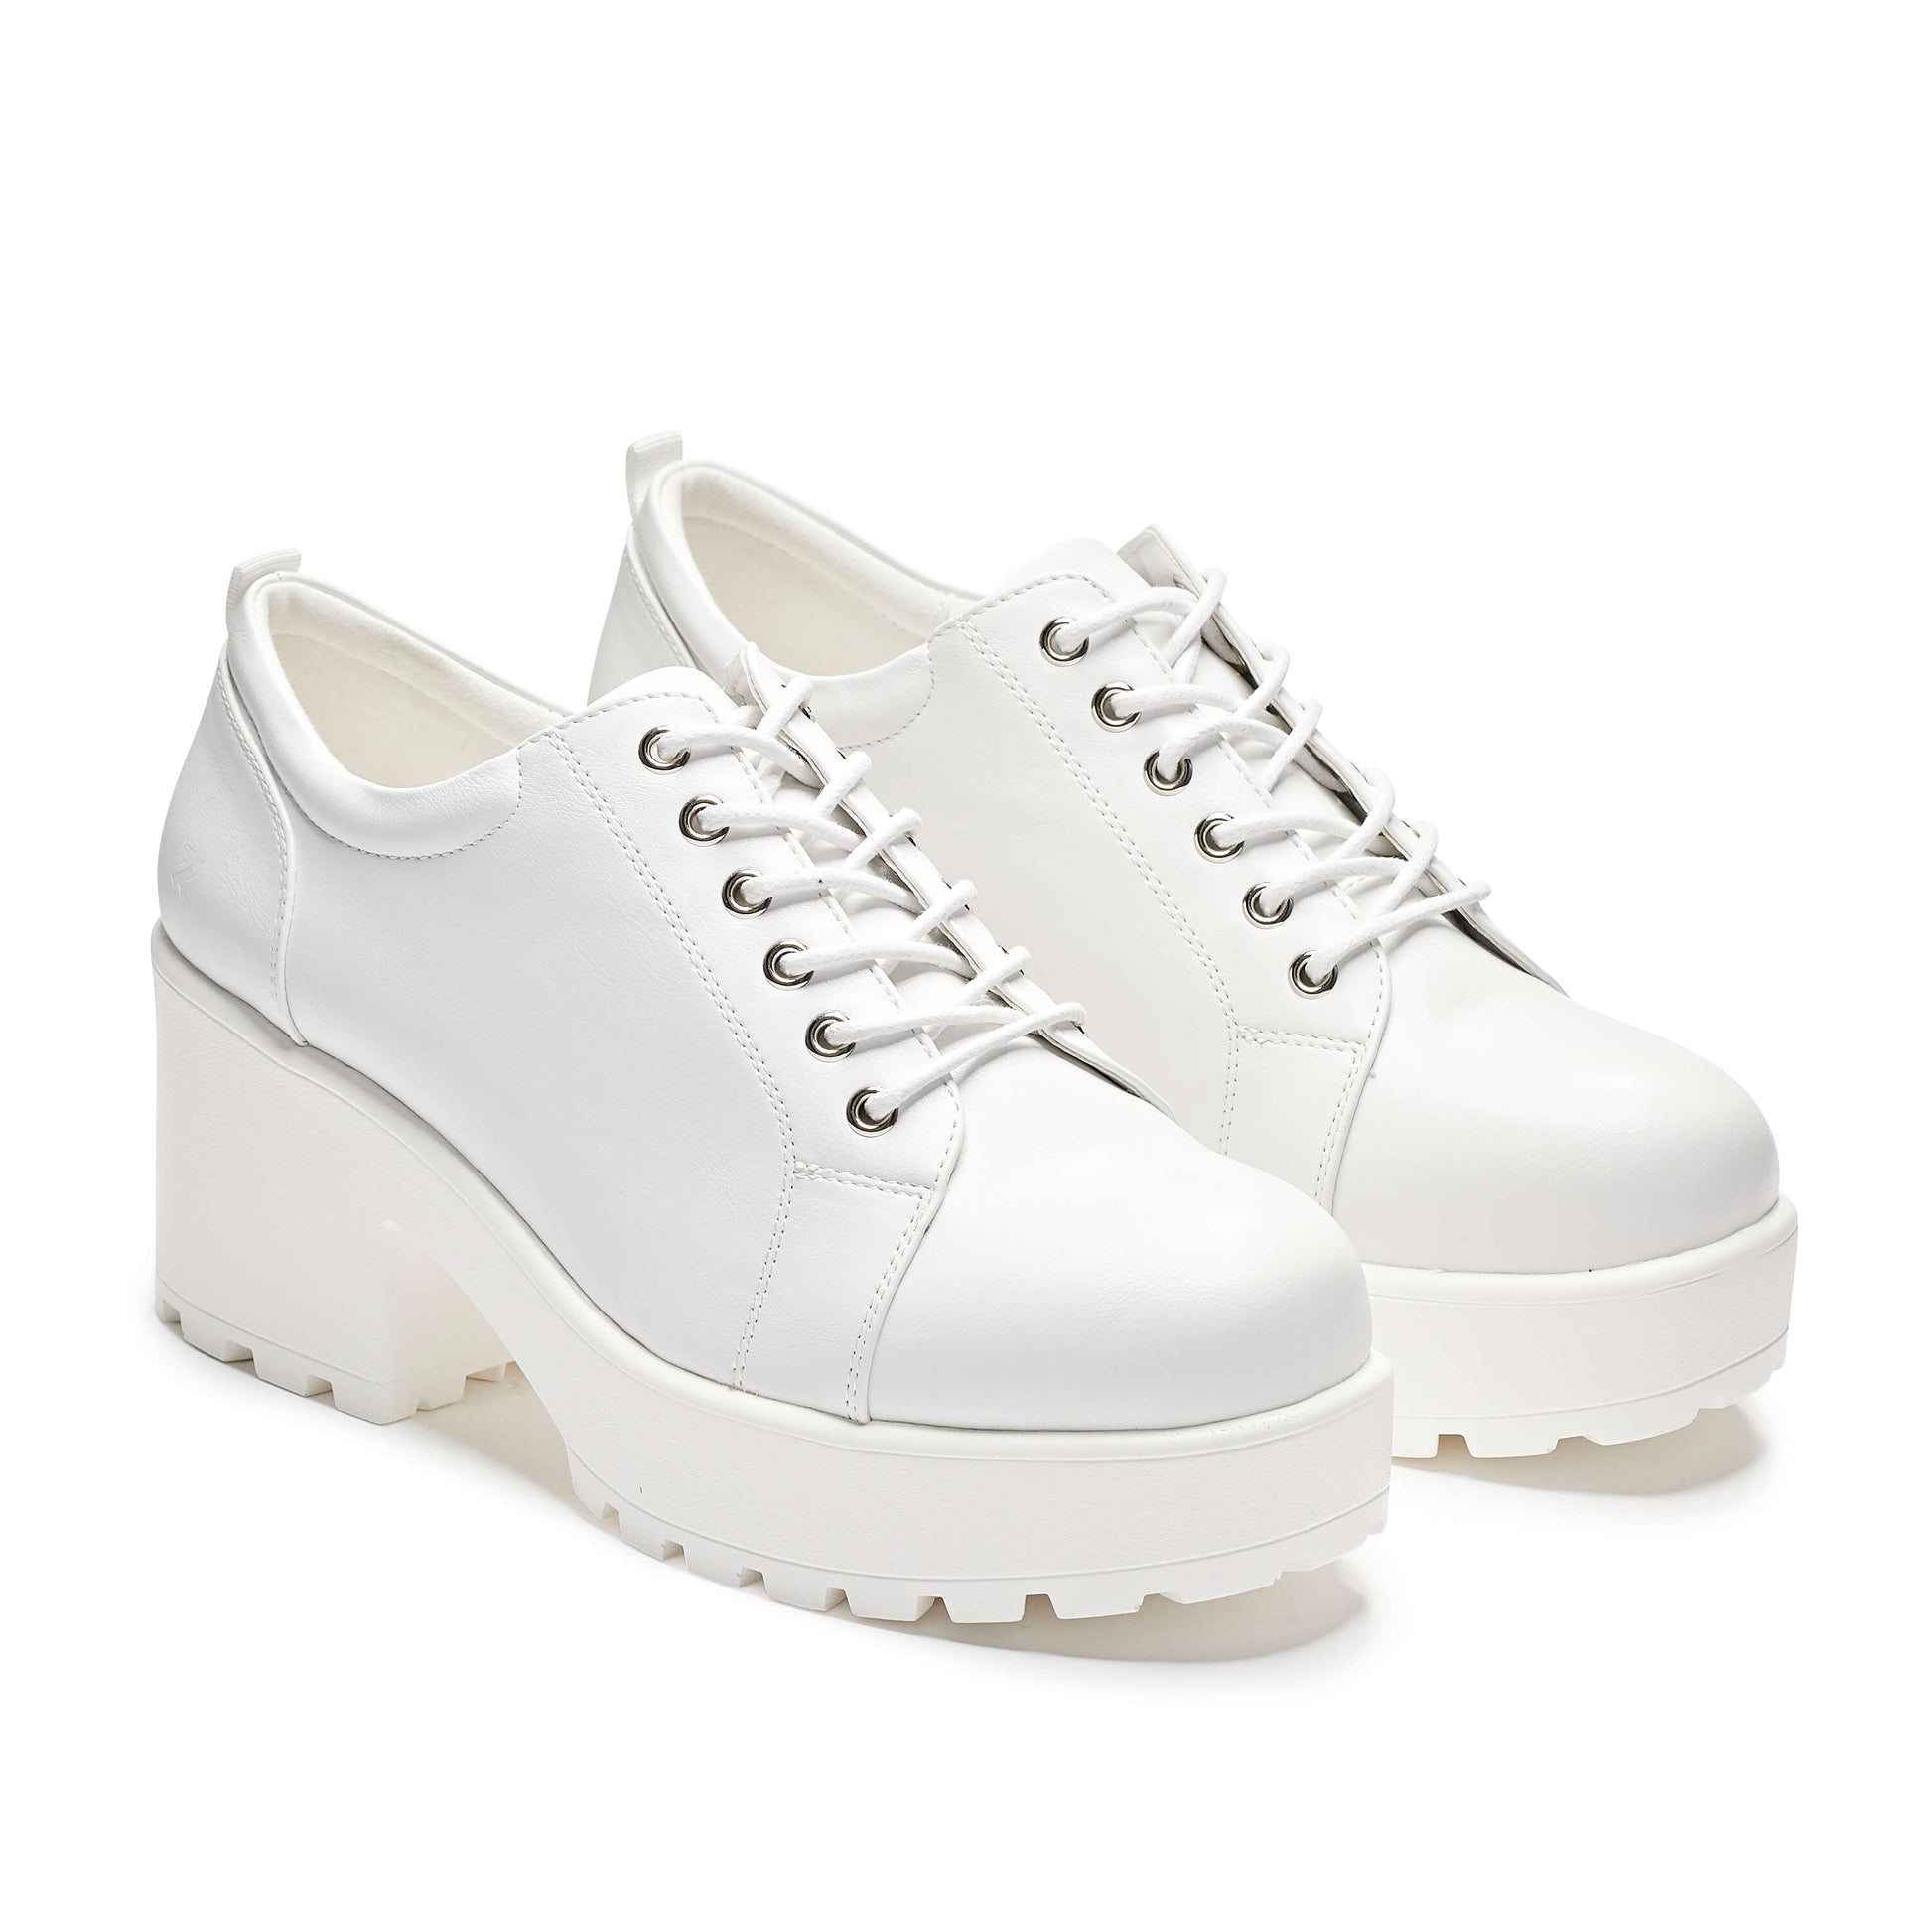 Rei Reloaded White Chunky Shoes - Shoes - KOI Footwear - White - Three-Quarter View